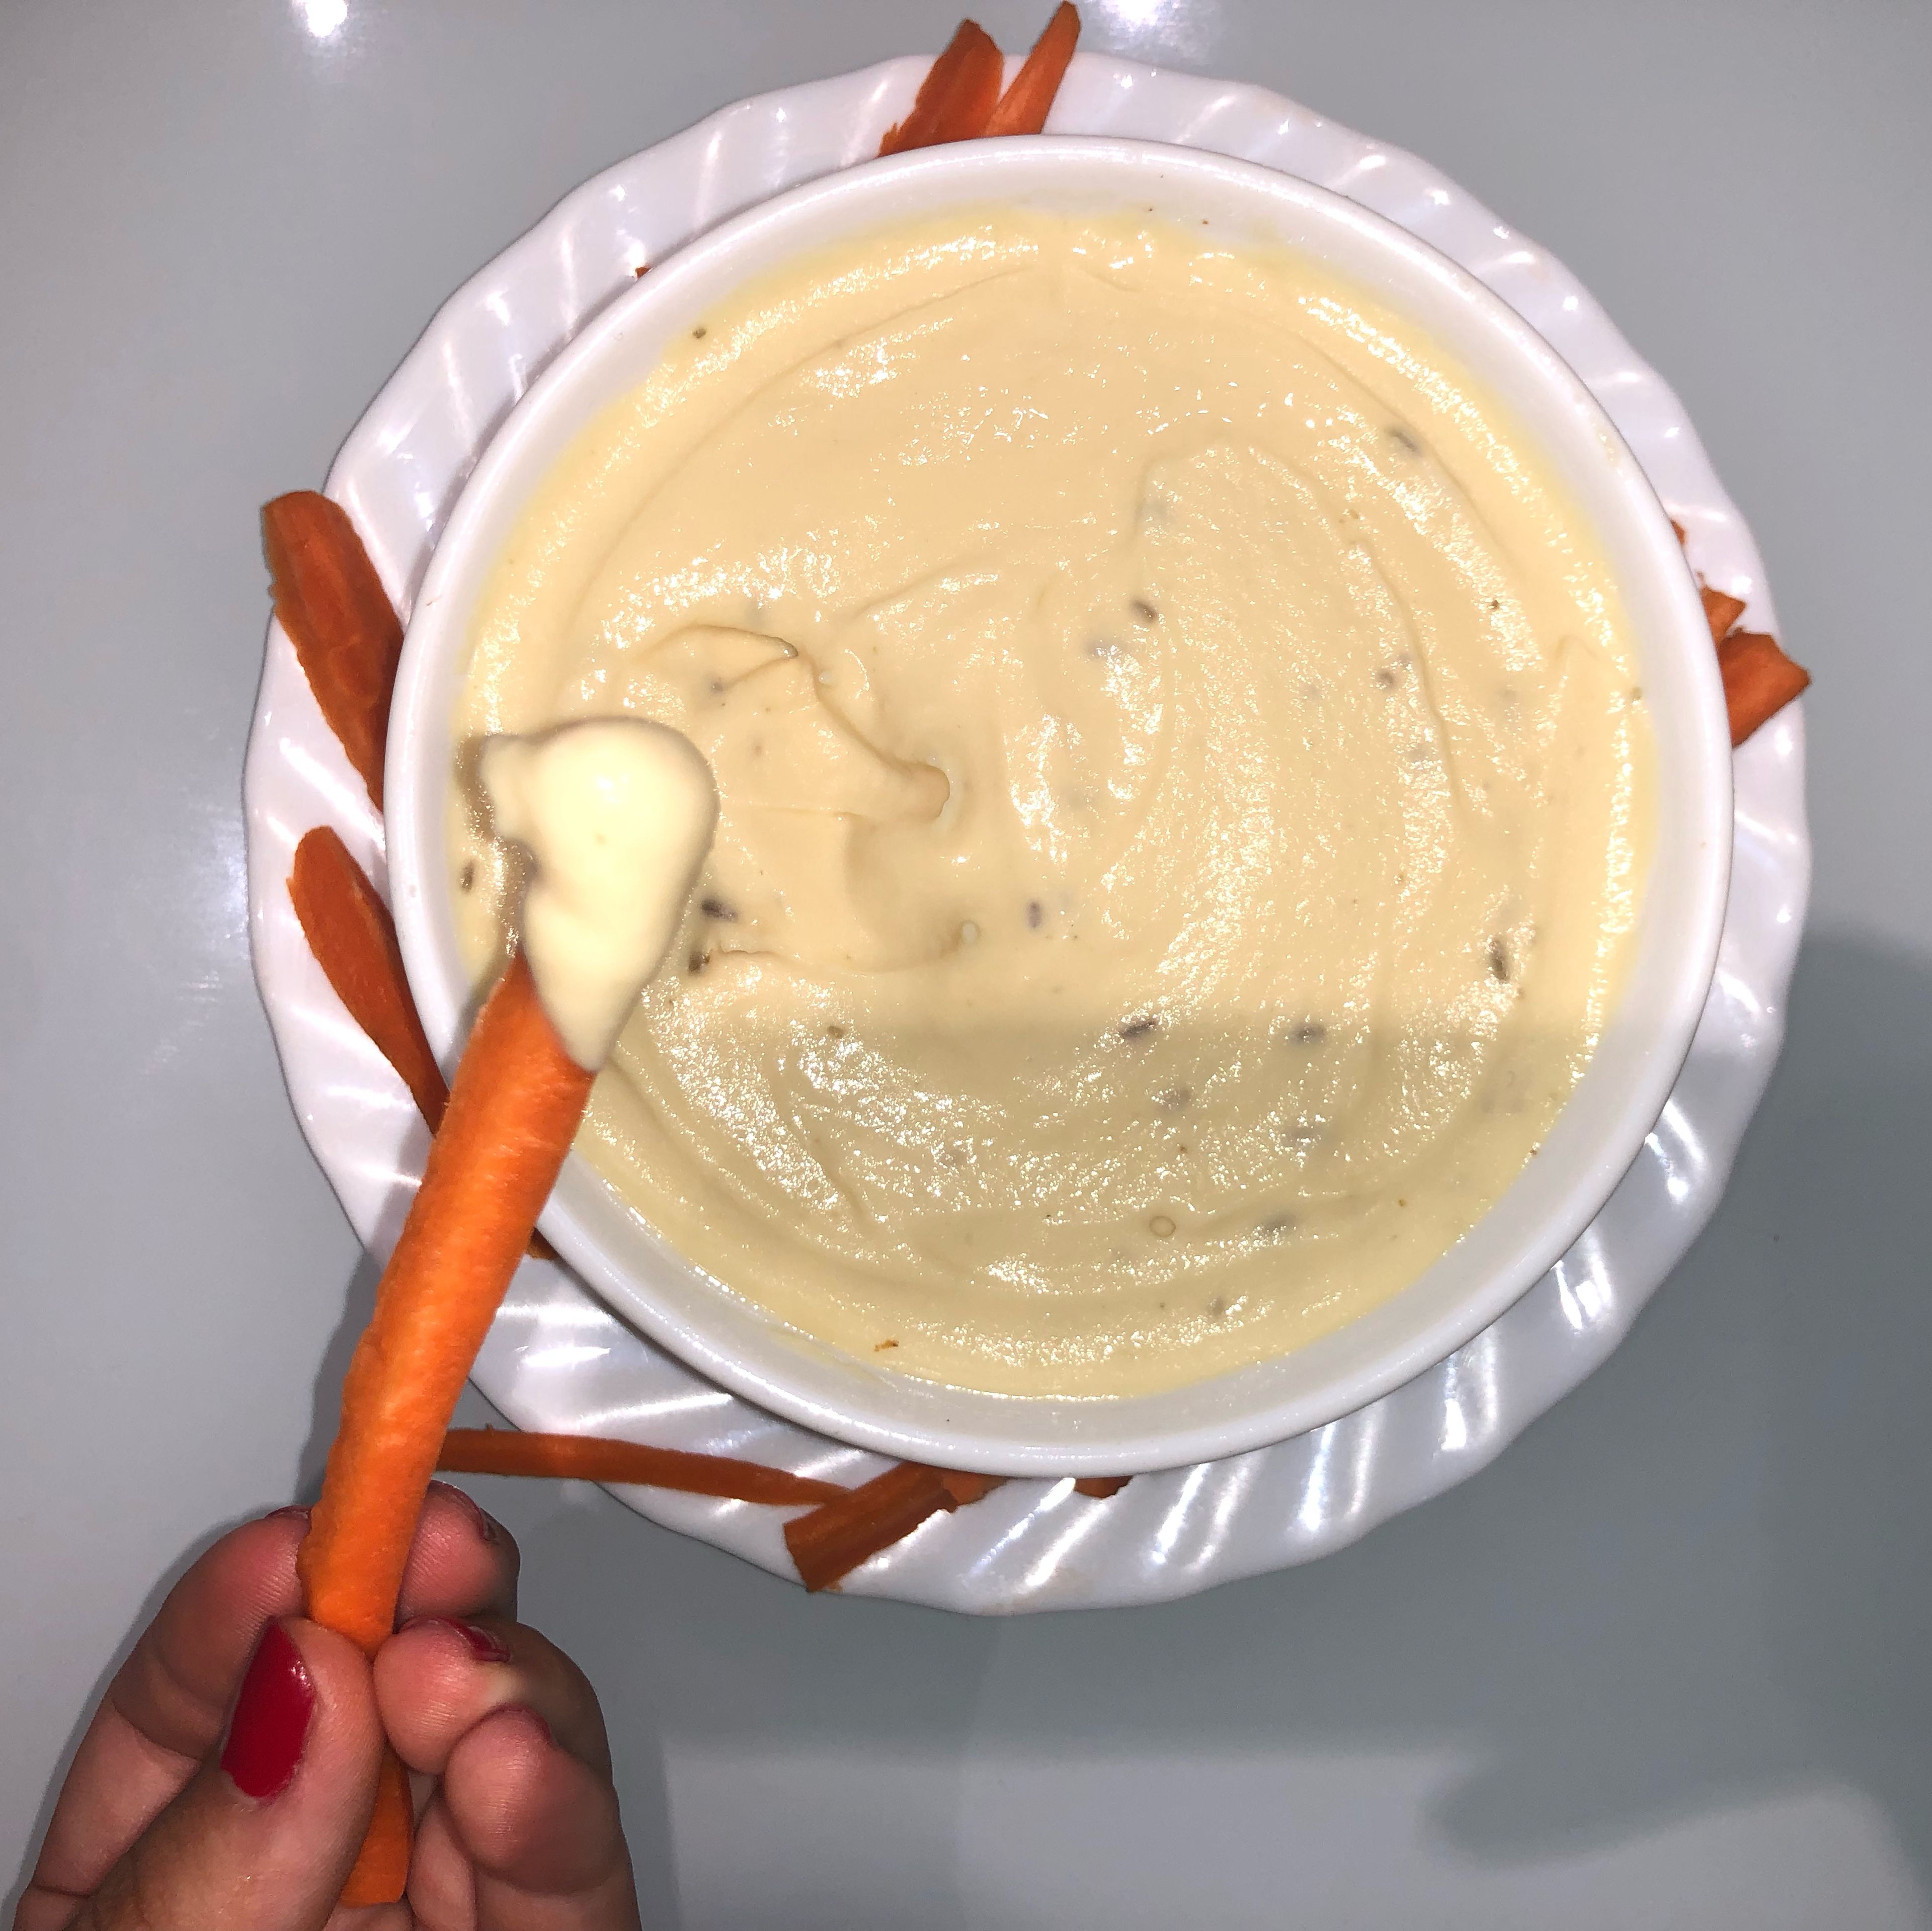 Chop some vegetables (carrots are my favourites), and dip them in your quick and delicious hummus!